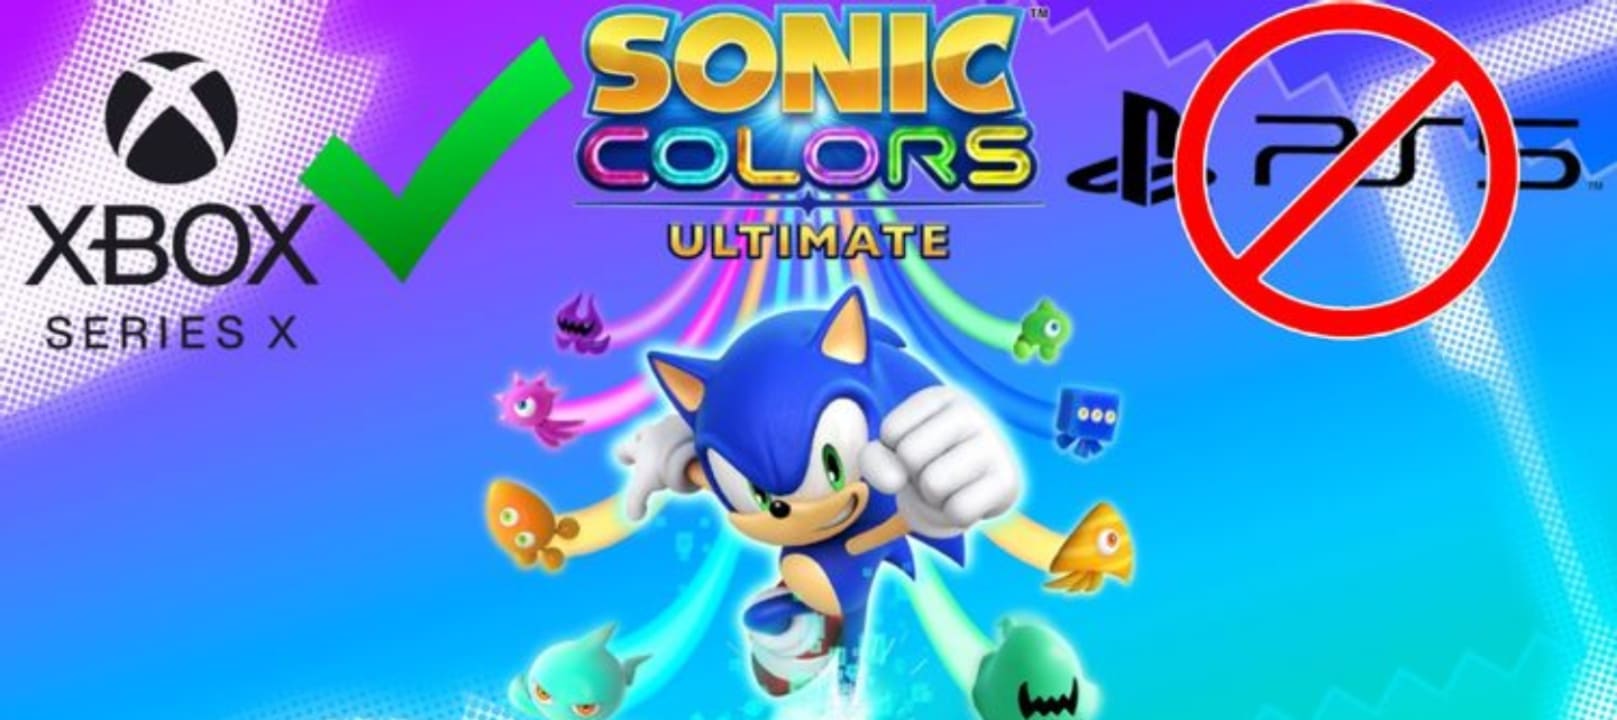 Sonic-Colors-Ultimate_No-PS5-version (1)